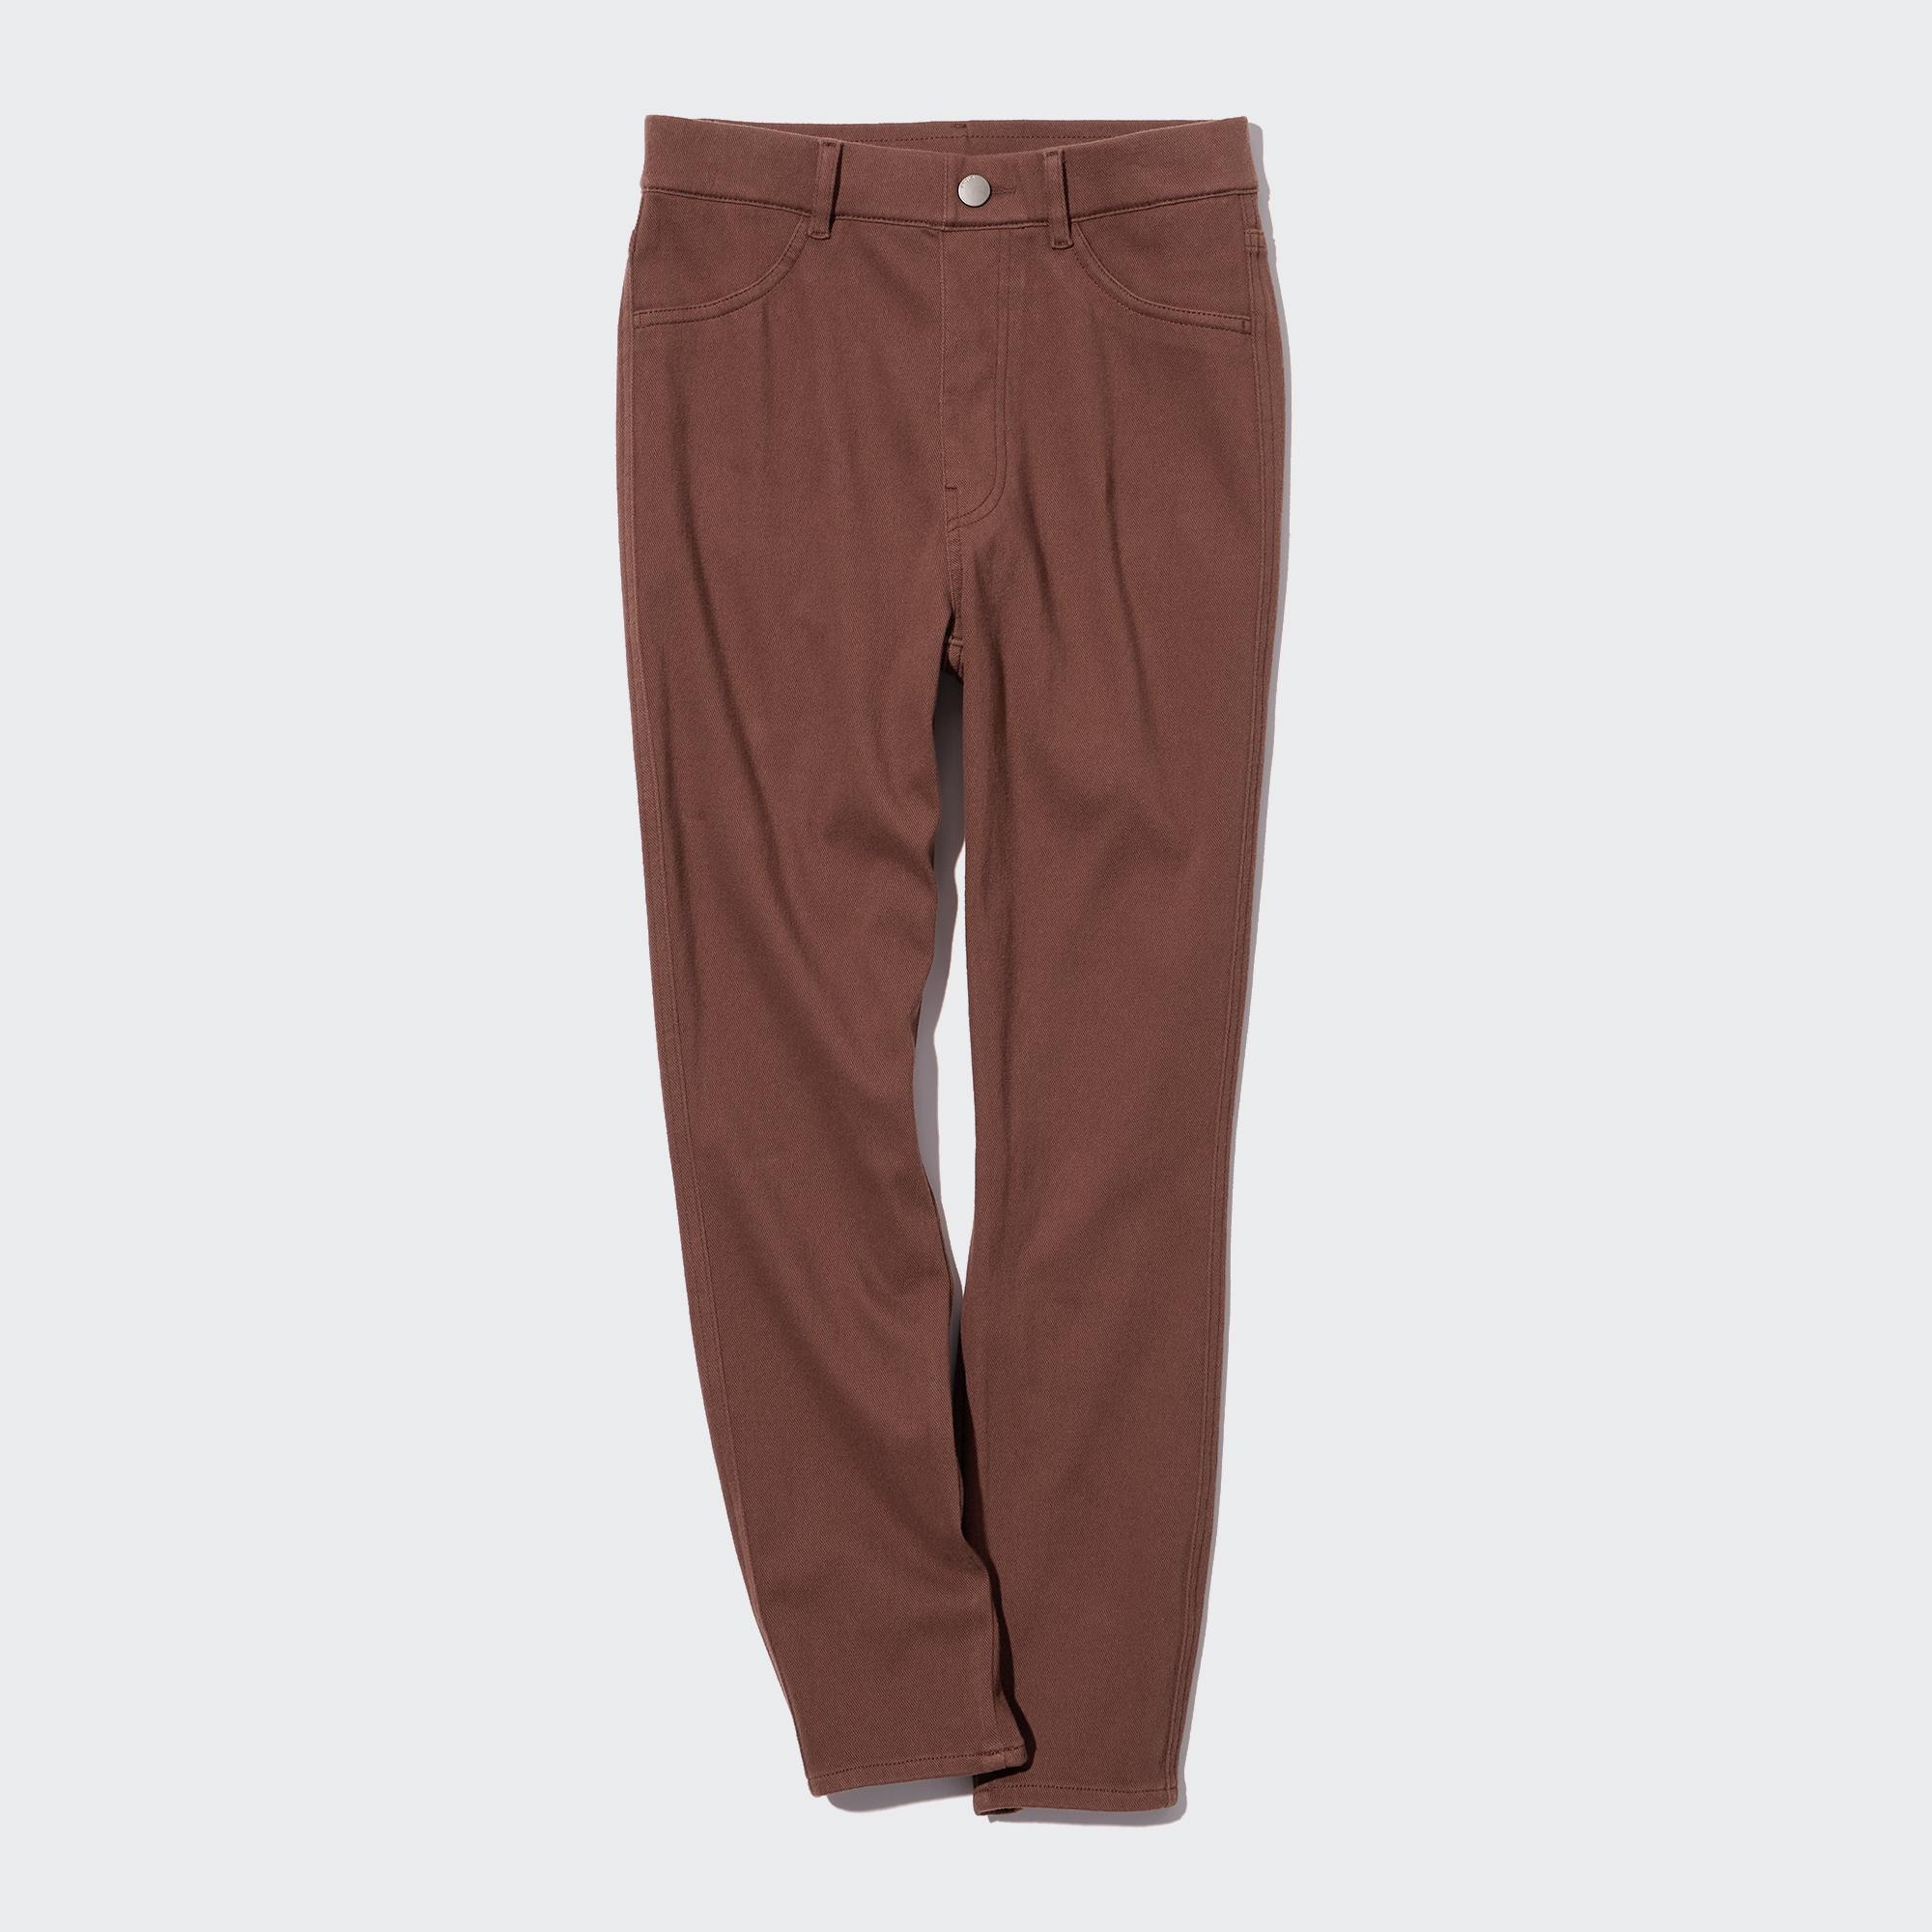 BUIgtTklOP Pants For Women Clearance Women's Comfortable Cropped